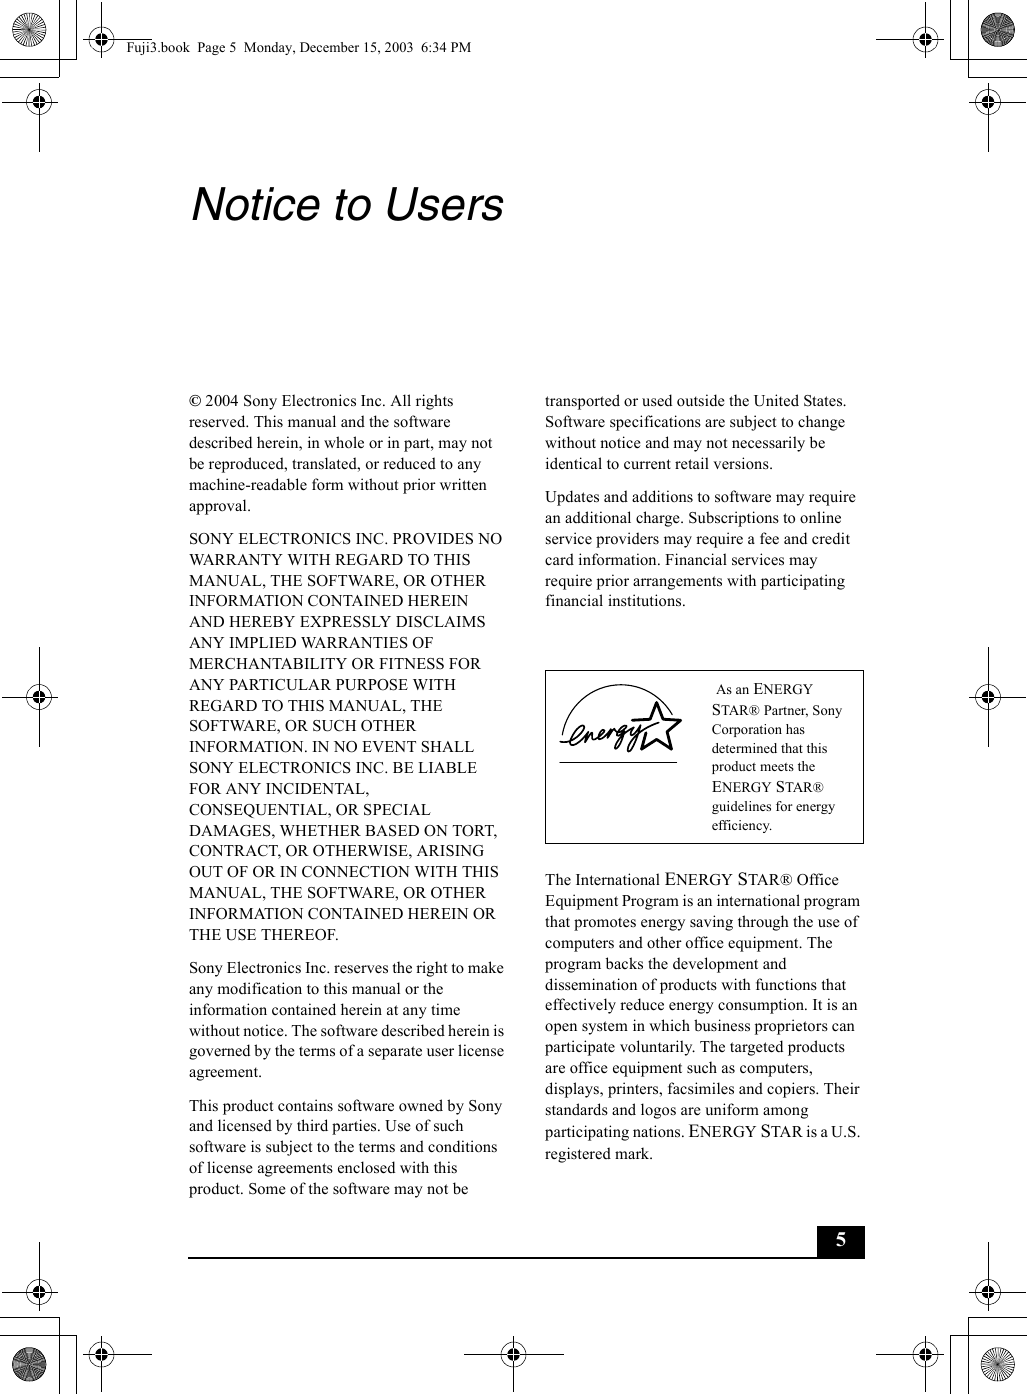 5Notice to Users© 2004 Sony Electronics Inc. All rights reserved. This manual and the software described herein, in whole or in part, may not be reproduced, translated, or reduced to any machine-readable form without prior written approval.SONY ELECTRONICS INC. PROVIDES NO WARRANTY WITH REGARD TO THIS MANUAL, THE SOFTWARE, OR OTHER INFORMATION CONTAINED HEREIN AND HEREBY EXPRESSLY DISCLAIMS ANY IMPLIED WARRANTIES OF MERCHANTABILITY OR FITNESS FOR ANY PARTICULAR PURPOSE WITH REGARD TO THIS MANUAL, THE SOFTWARE, OR SUCH OTHER INFORMATION. IN NO EVENT SHALL SONY ELECTRONICS INC. BE LIABLE FOR ANY INCIDENTAL, CONSEQUENTIAL, OR SPECIAL DAMAGES, WHETHER BASED ON TORT, CONTRACT, OR OTHERWISE, ARISING OUT OF OR IN CONNECTION WITH THIS MANUAL, THE SOFTWARE, OR OTHER INFORMATION CONTAINED HEREIN OR THE USE THEREOF.Sony Electronics Inc. reserves the right to make any modification to this manual or the information contained herein at any time without notice. The software described herein is governed by the terms of a separate user license agreement.This product contains software owned by Sony and licensed by third parties. Use of such software is subject to the terms and conditions of license agreements enclosed with this product. Some of the software may not betransported or used outside the United States. Software specifications are subject to change without notice and may not necessarily be identical to current retail versions.Updates and additions to software may require an additional charge. Subscriptions to online service providers may require a fee and credit card information. Financial services may require prior arrangements with participating financial institutions.The International ENERGY STAR® Office Equipment Program is an international program that promotes energy saving through the use of computers and other office equipment. The program backs the development and dissemination of products with functions that effectively reduce energy consumption. It is an open system in which business proprietors can participate voluntarily. The targeted products are office equipment such as computers, displays, printers, facsimiles and copiers. Their standards and logos are uniform among participating nations. ENERGY STAR is a U.S. registered mark. As an ENERGY STAR® Partner, Sony Corporation has determined that this product meets the ENERGY STAR® guidelines for energy efficiency.Fuji3.book  Page 5  Monday, December 15, 2003  6:34 PM